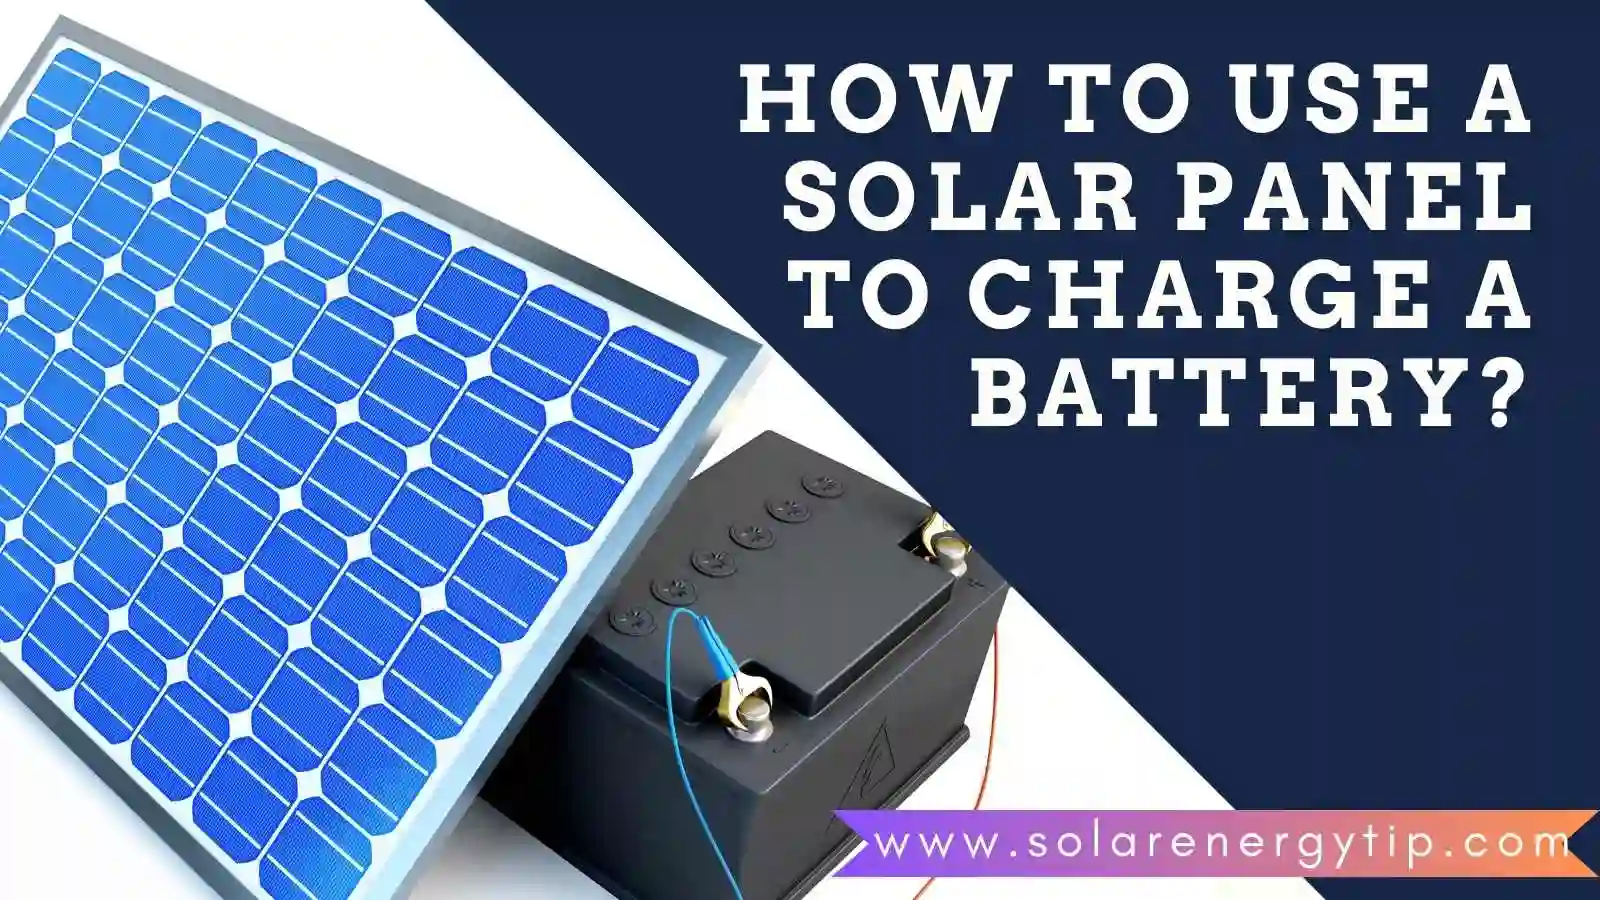 How To Use A Solar Panel To Charge A Battery